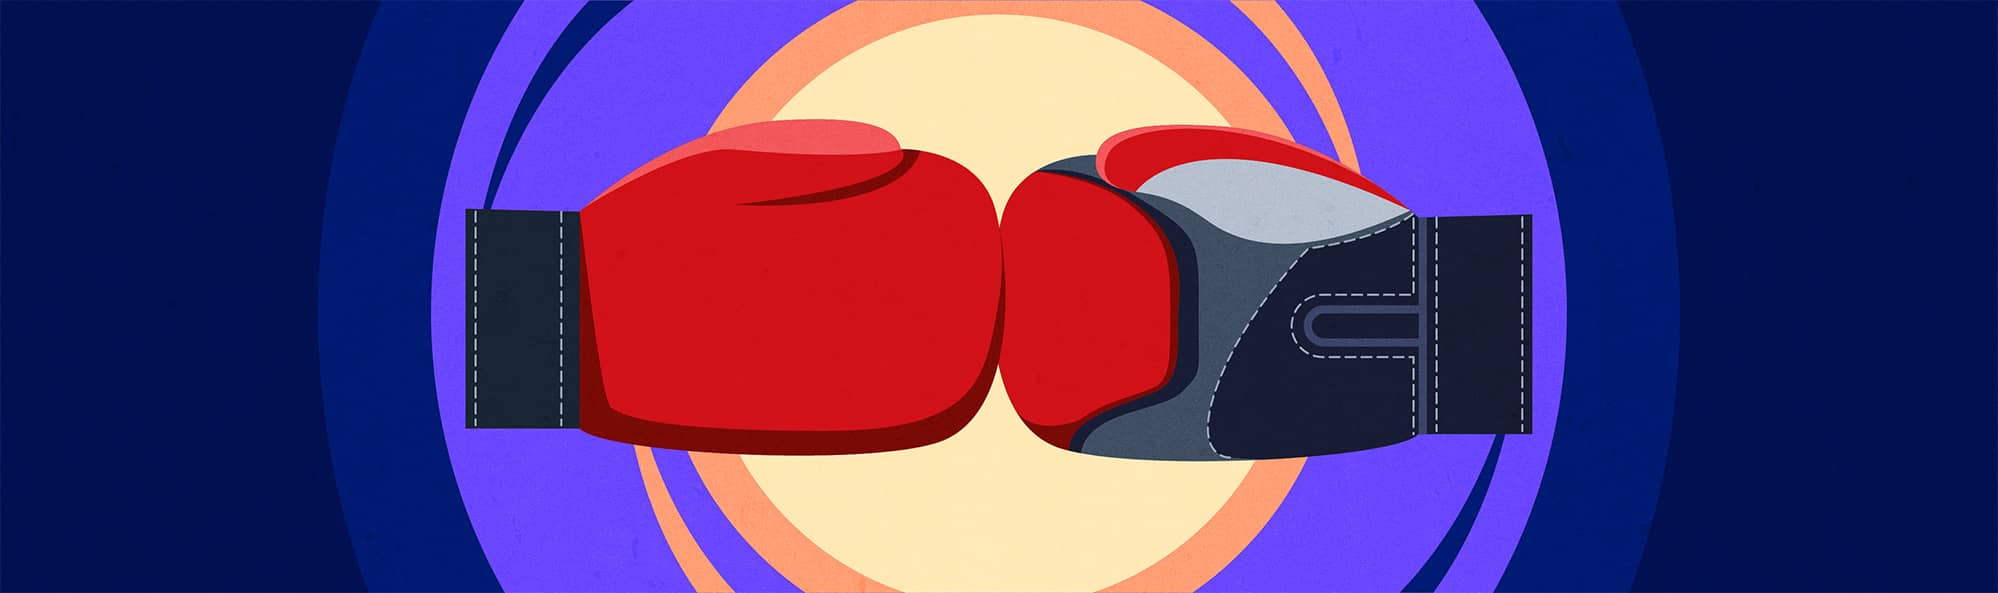 Accounting vs. Management Software: Let’s Get Ready to Rumble!